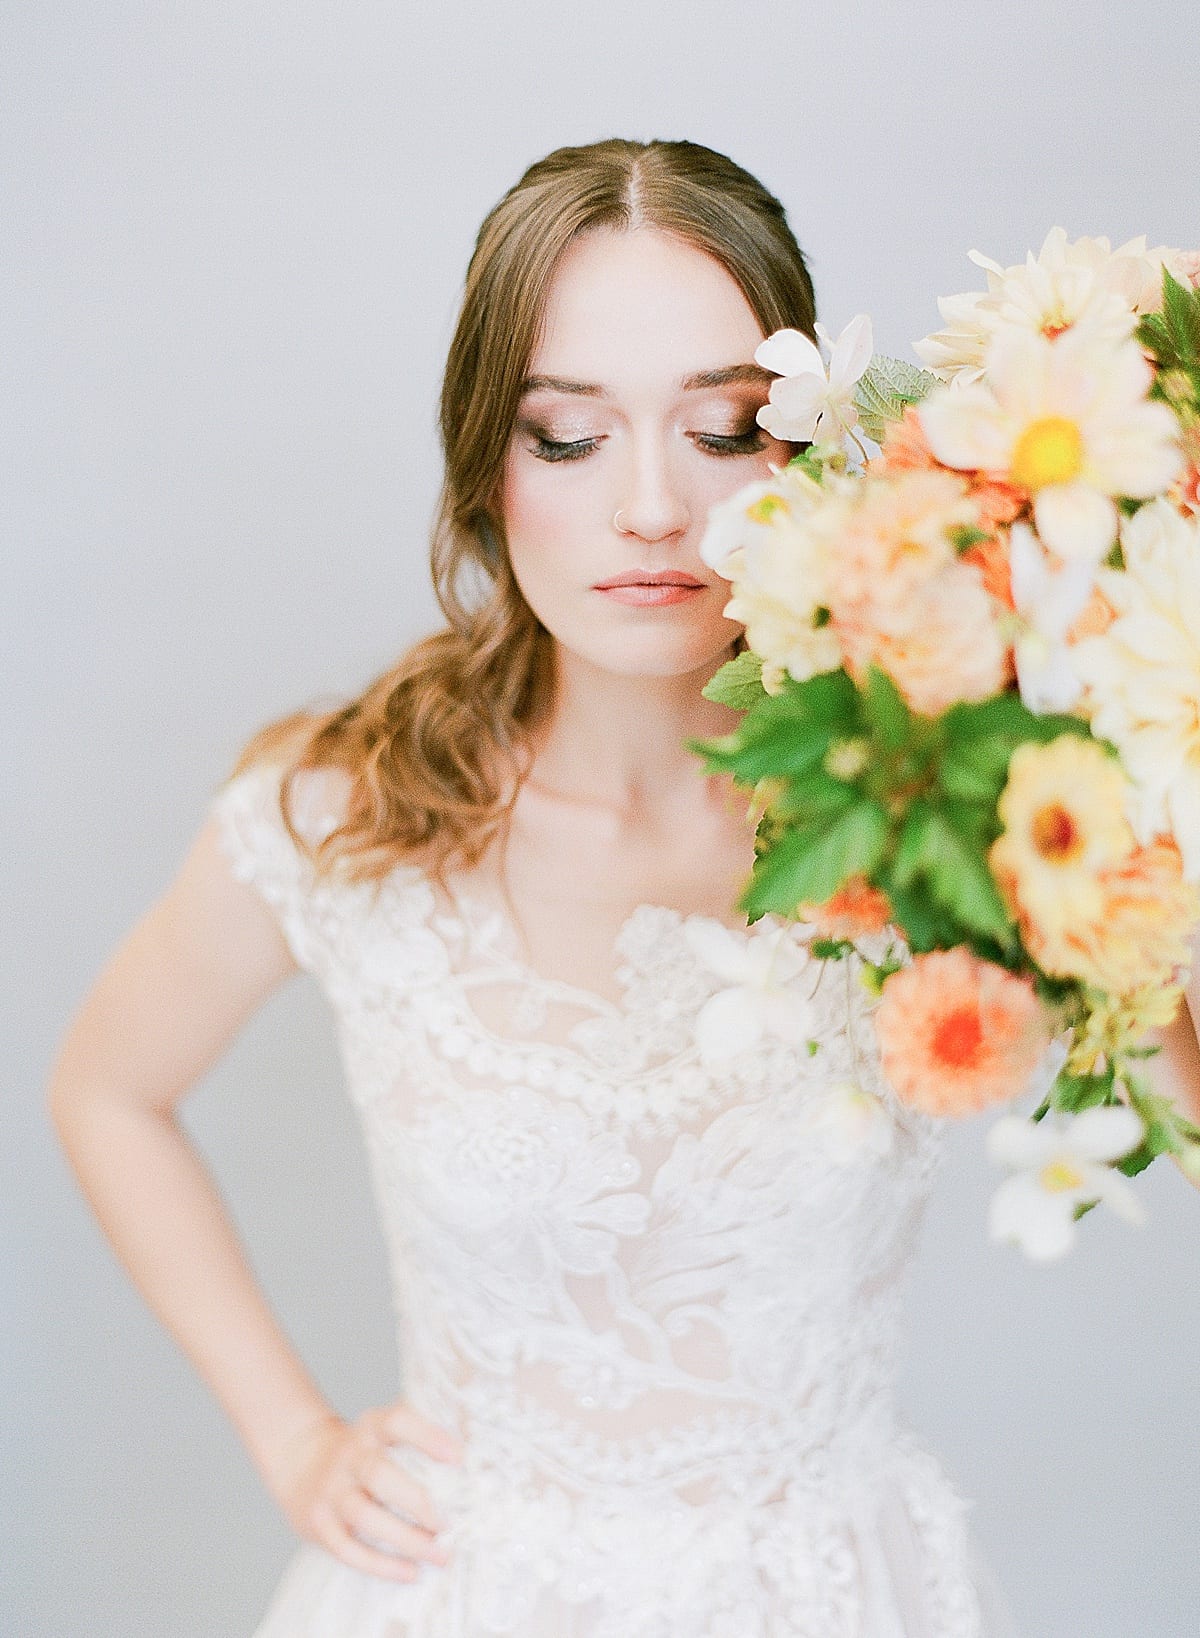 Bride with Wedding Hair and Makeup Holding Bouquet in Front of Face Looking Down Photo